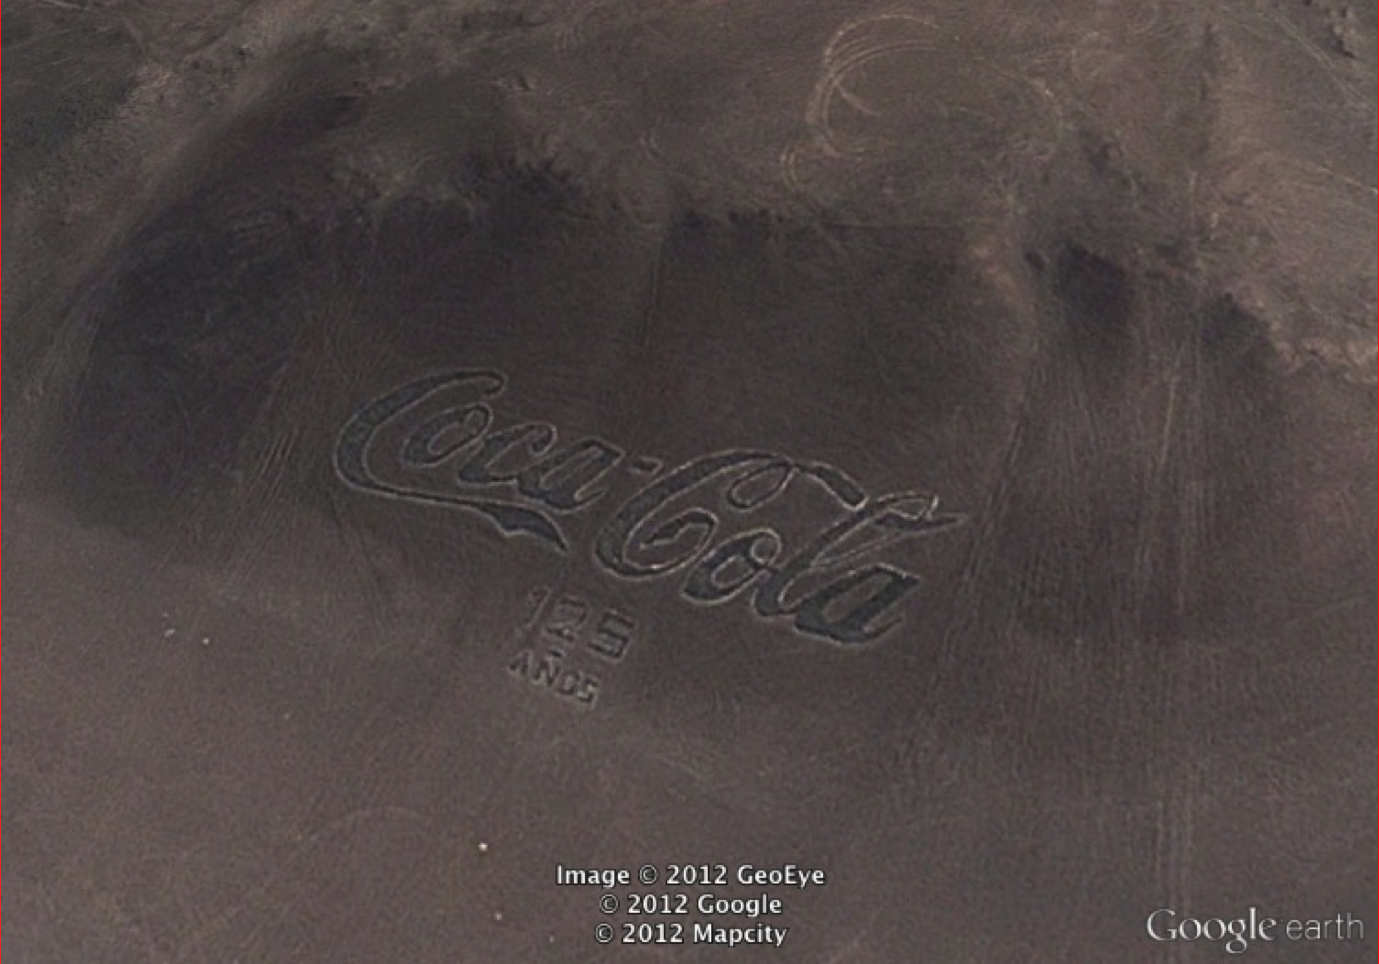 Coca Cola Advertising For Google Earth In The Chilean Desert